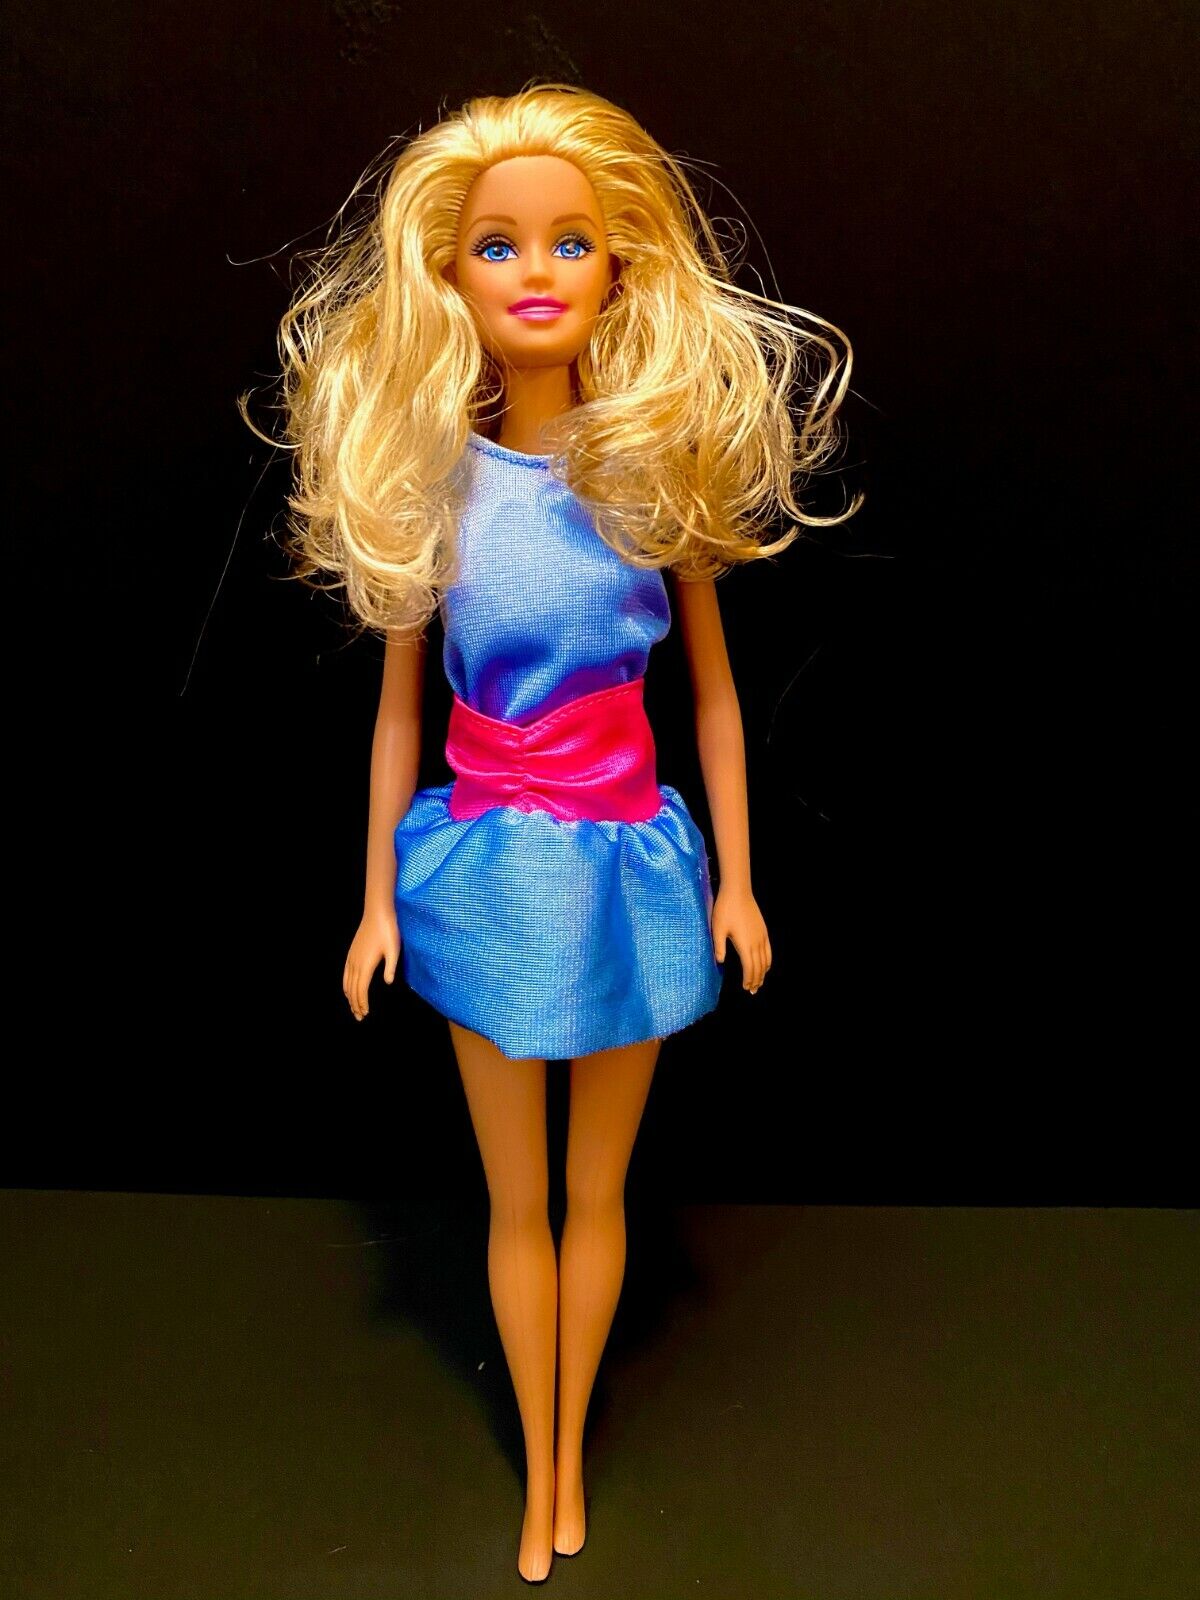 80's Style Barbie Doll with Curly Hair and Blue Prom Dress | eBay